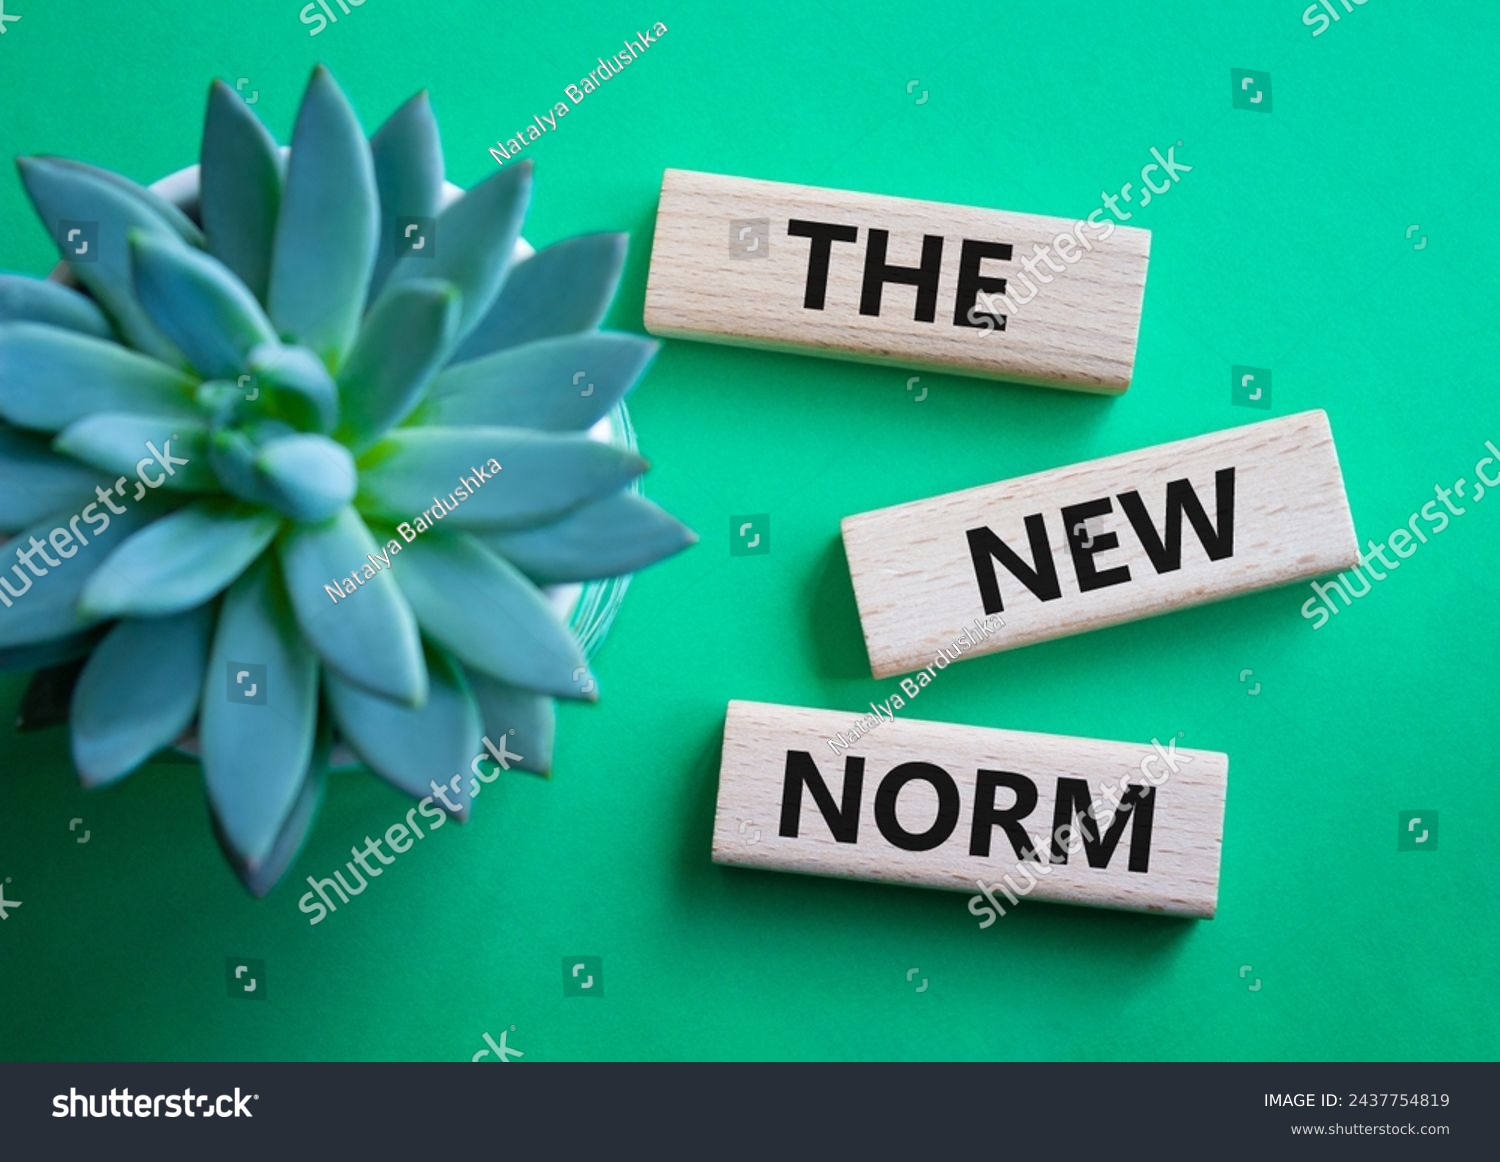 The new norm symbol. Concept words The new norm on wooden blocks. Beautiful green background with succulent plant. Business and The new norm concept. Copy space. #2437754819